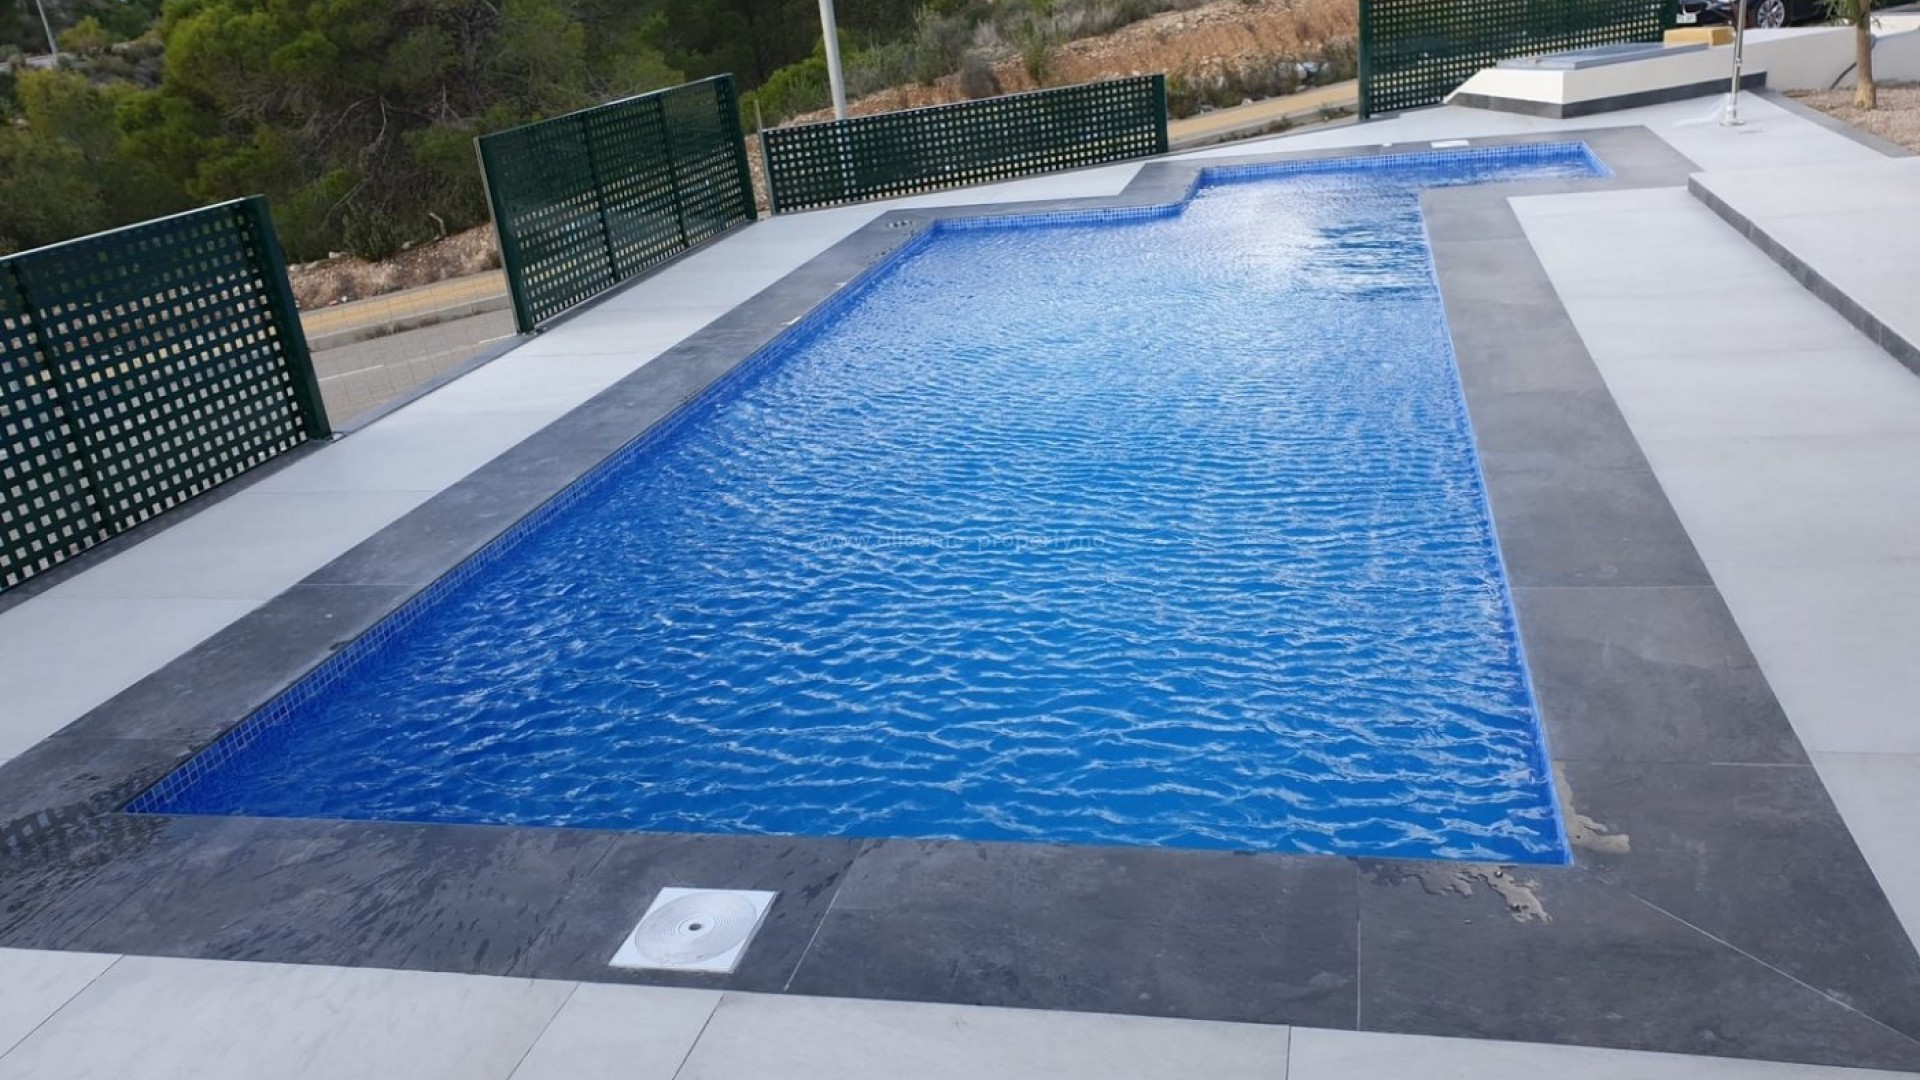 New villas/houses in Finestrat, Benidorm, 200 meters to golf, swimming pool, 3 bedrooms, 3 bathrooms, open terrace, solarium and parking for 2 cars